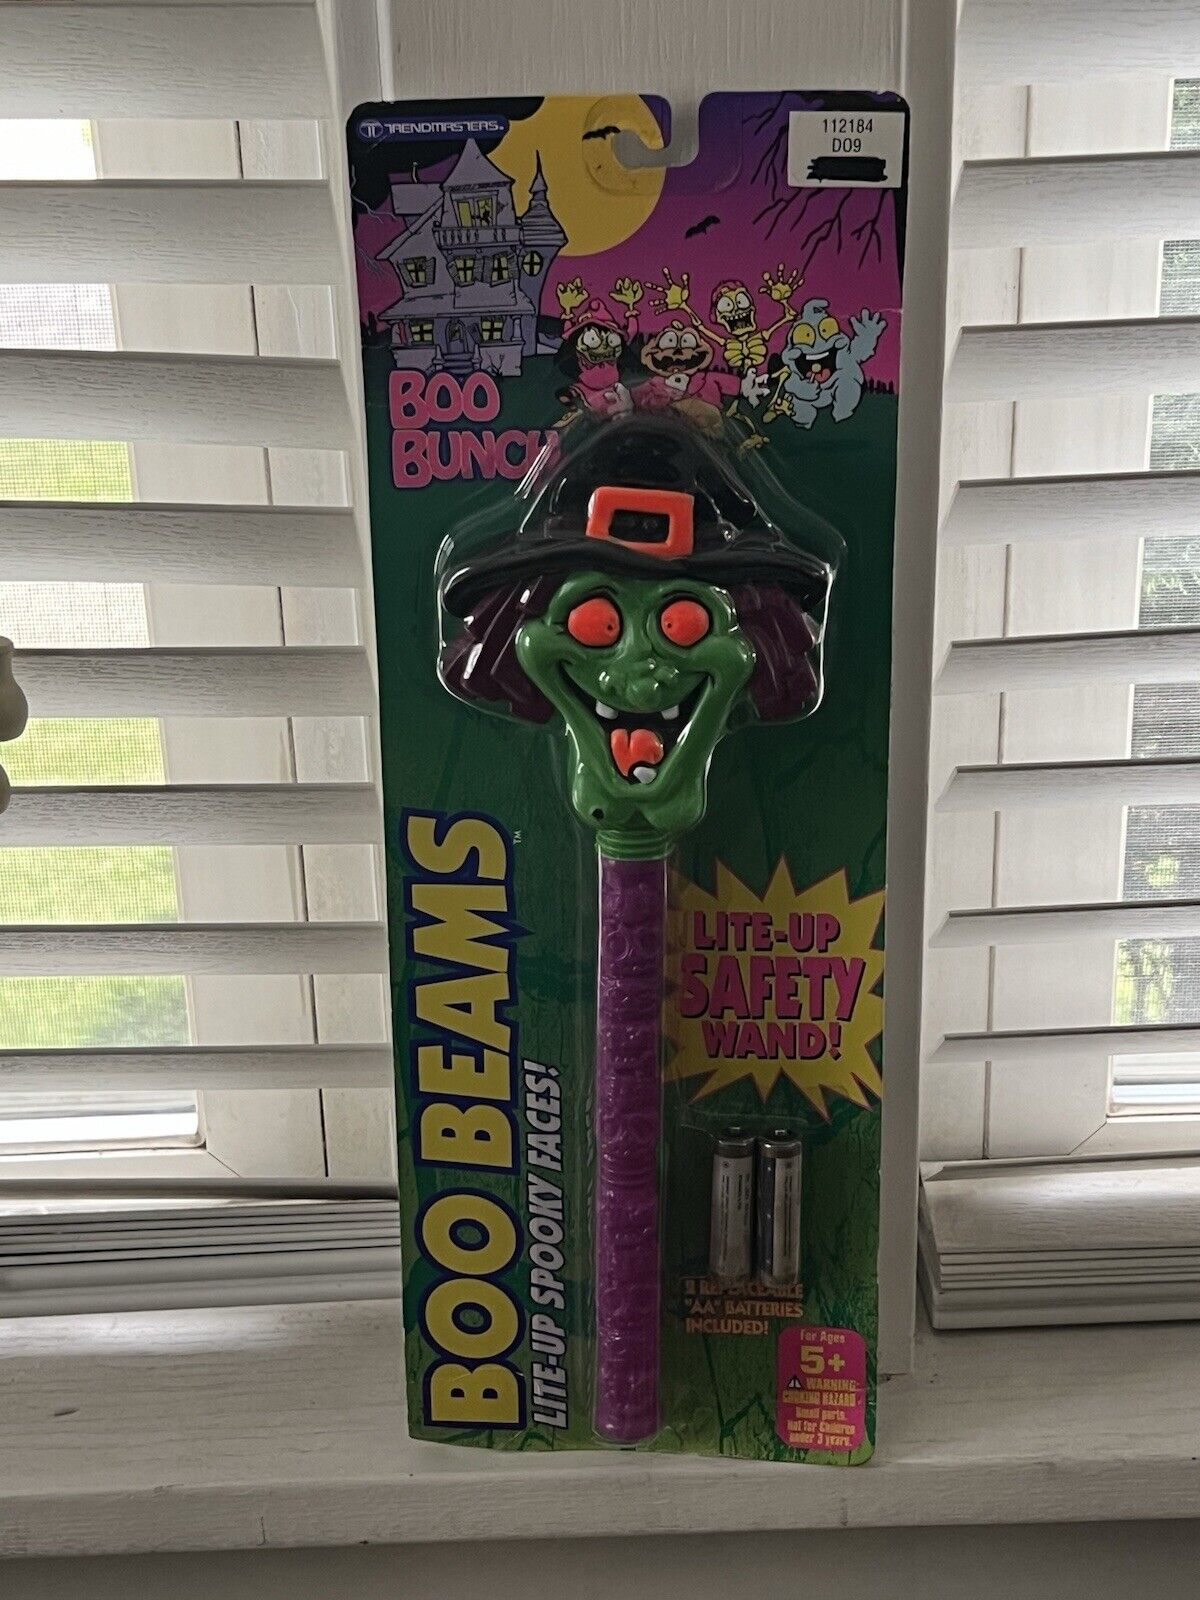 Vintage Halloween 1993 BOO BEAMS LIGHT UP SAFETY WAND WITCH